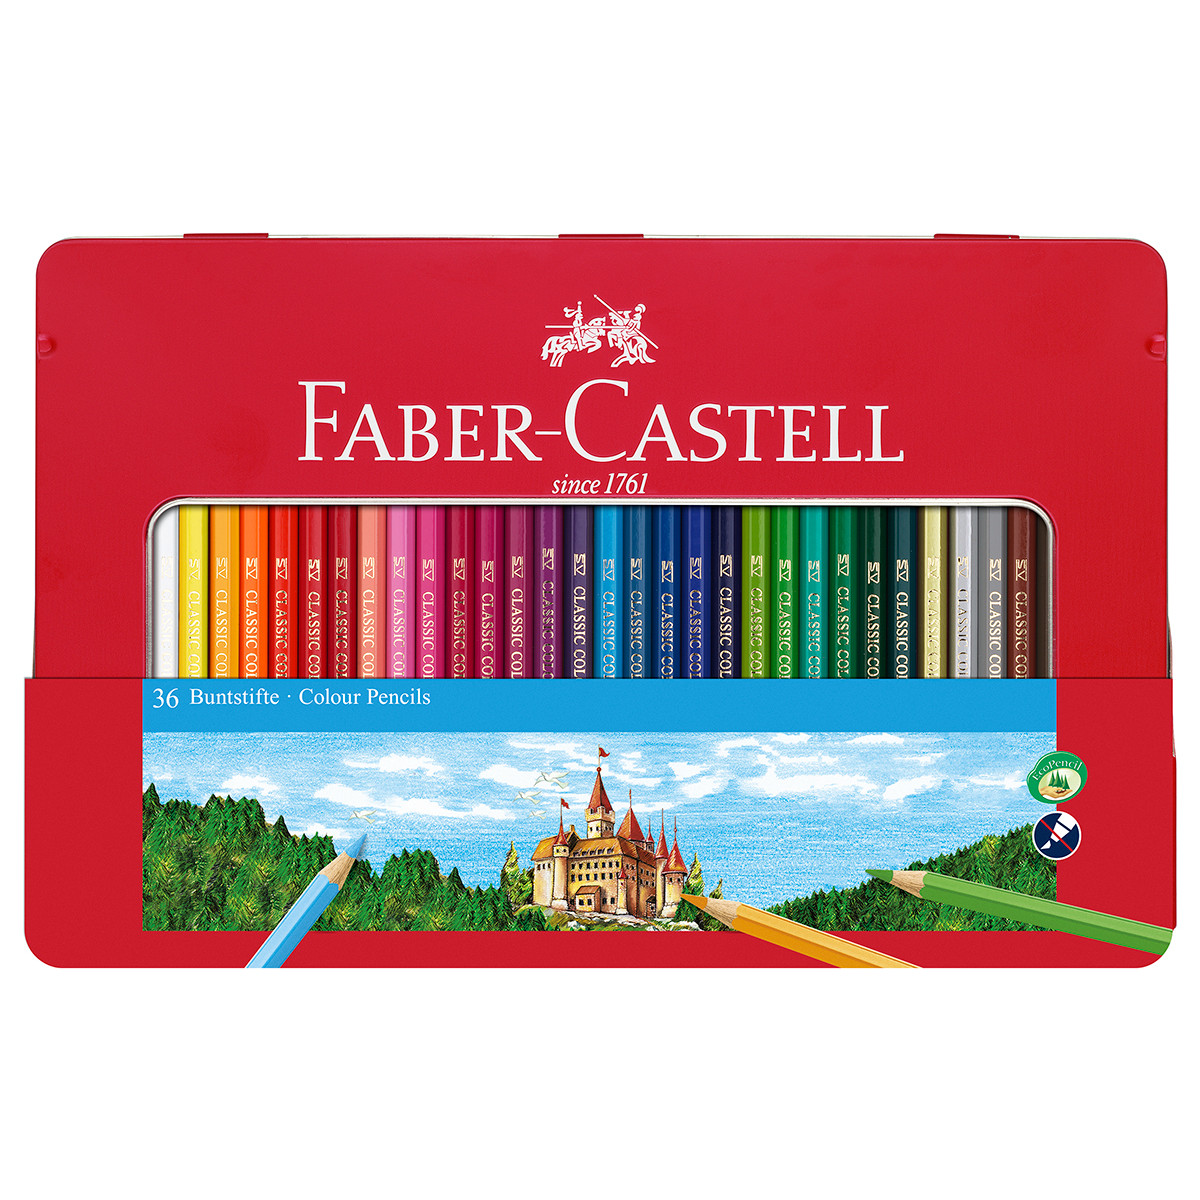 Faber-Castell Hexagonal Colouring Pencils - Assorted Colours (Tin of 36)